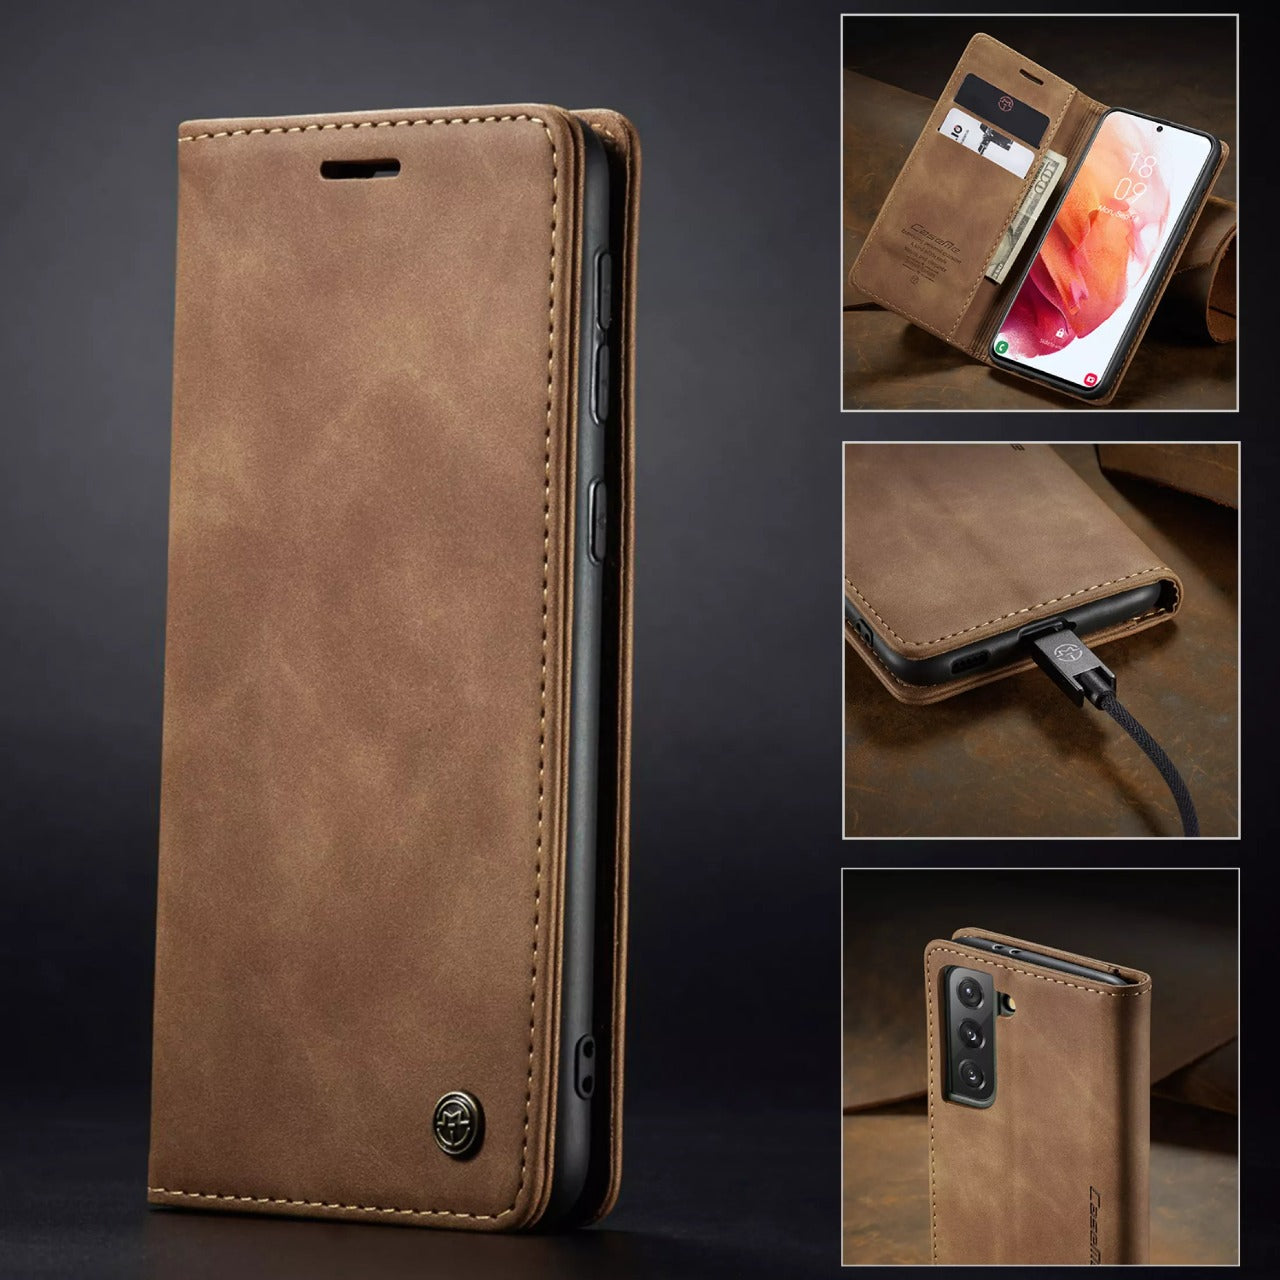 [FREE SHIPPING] CaseMe Retro Leather Case For Samsung S21 FE Book Style Flip Wallet Magnetic Cover Card Slots Case For Samsung S21 FE - Brown